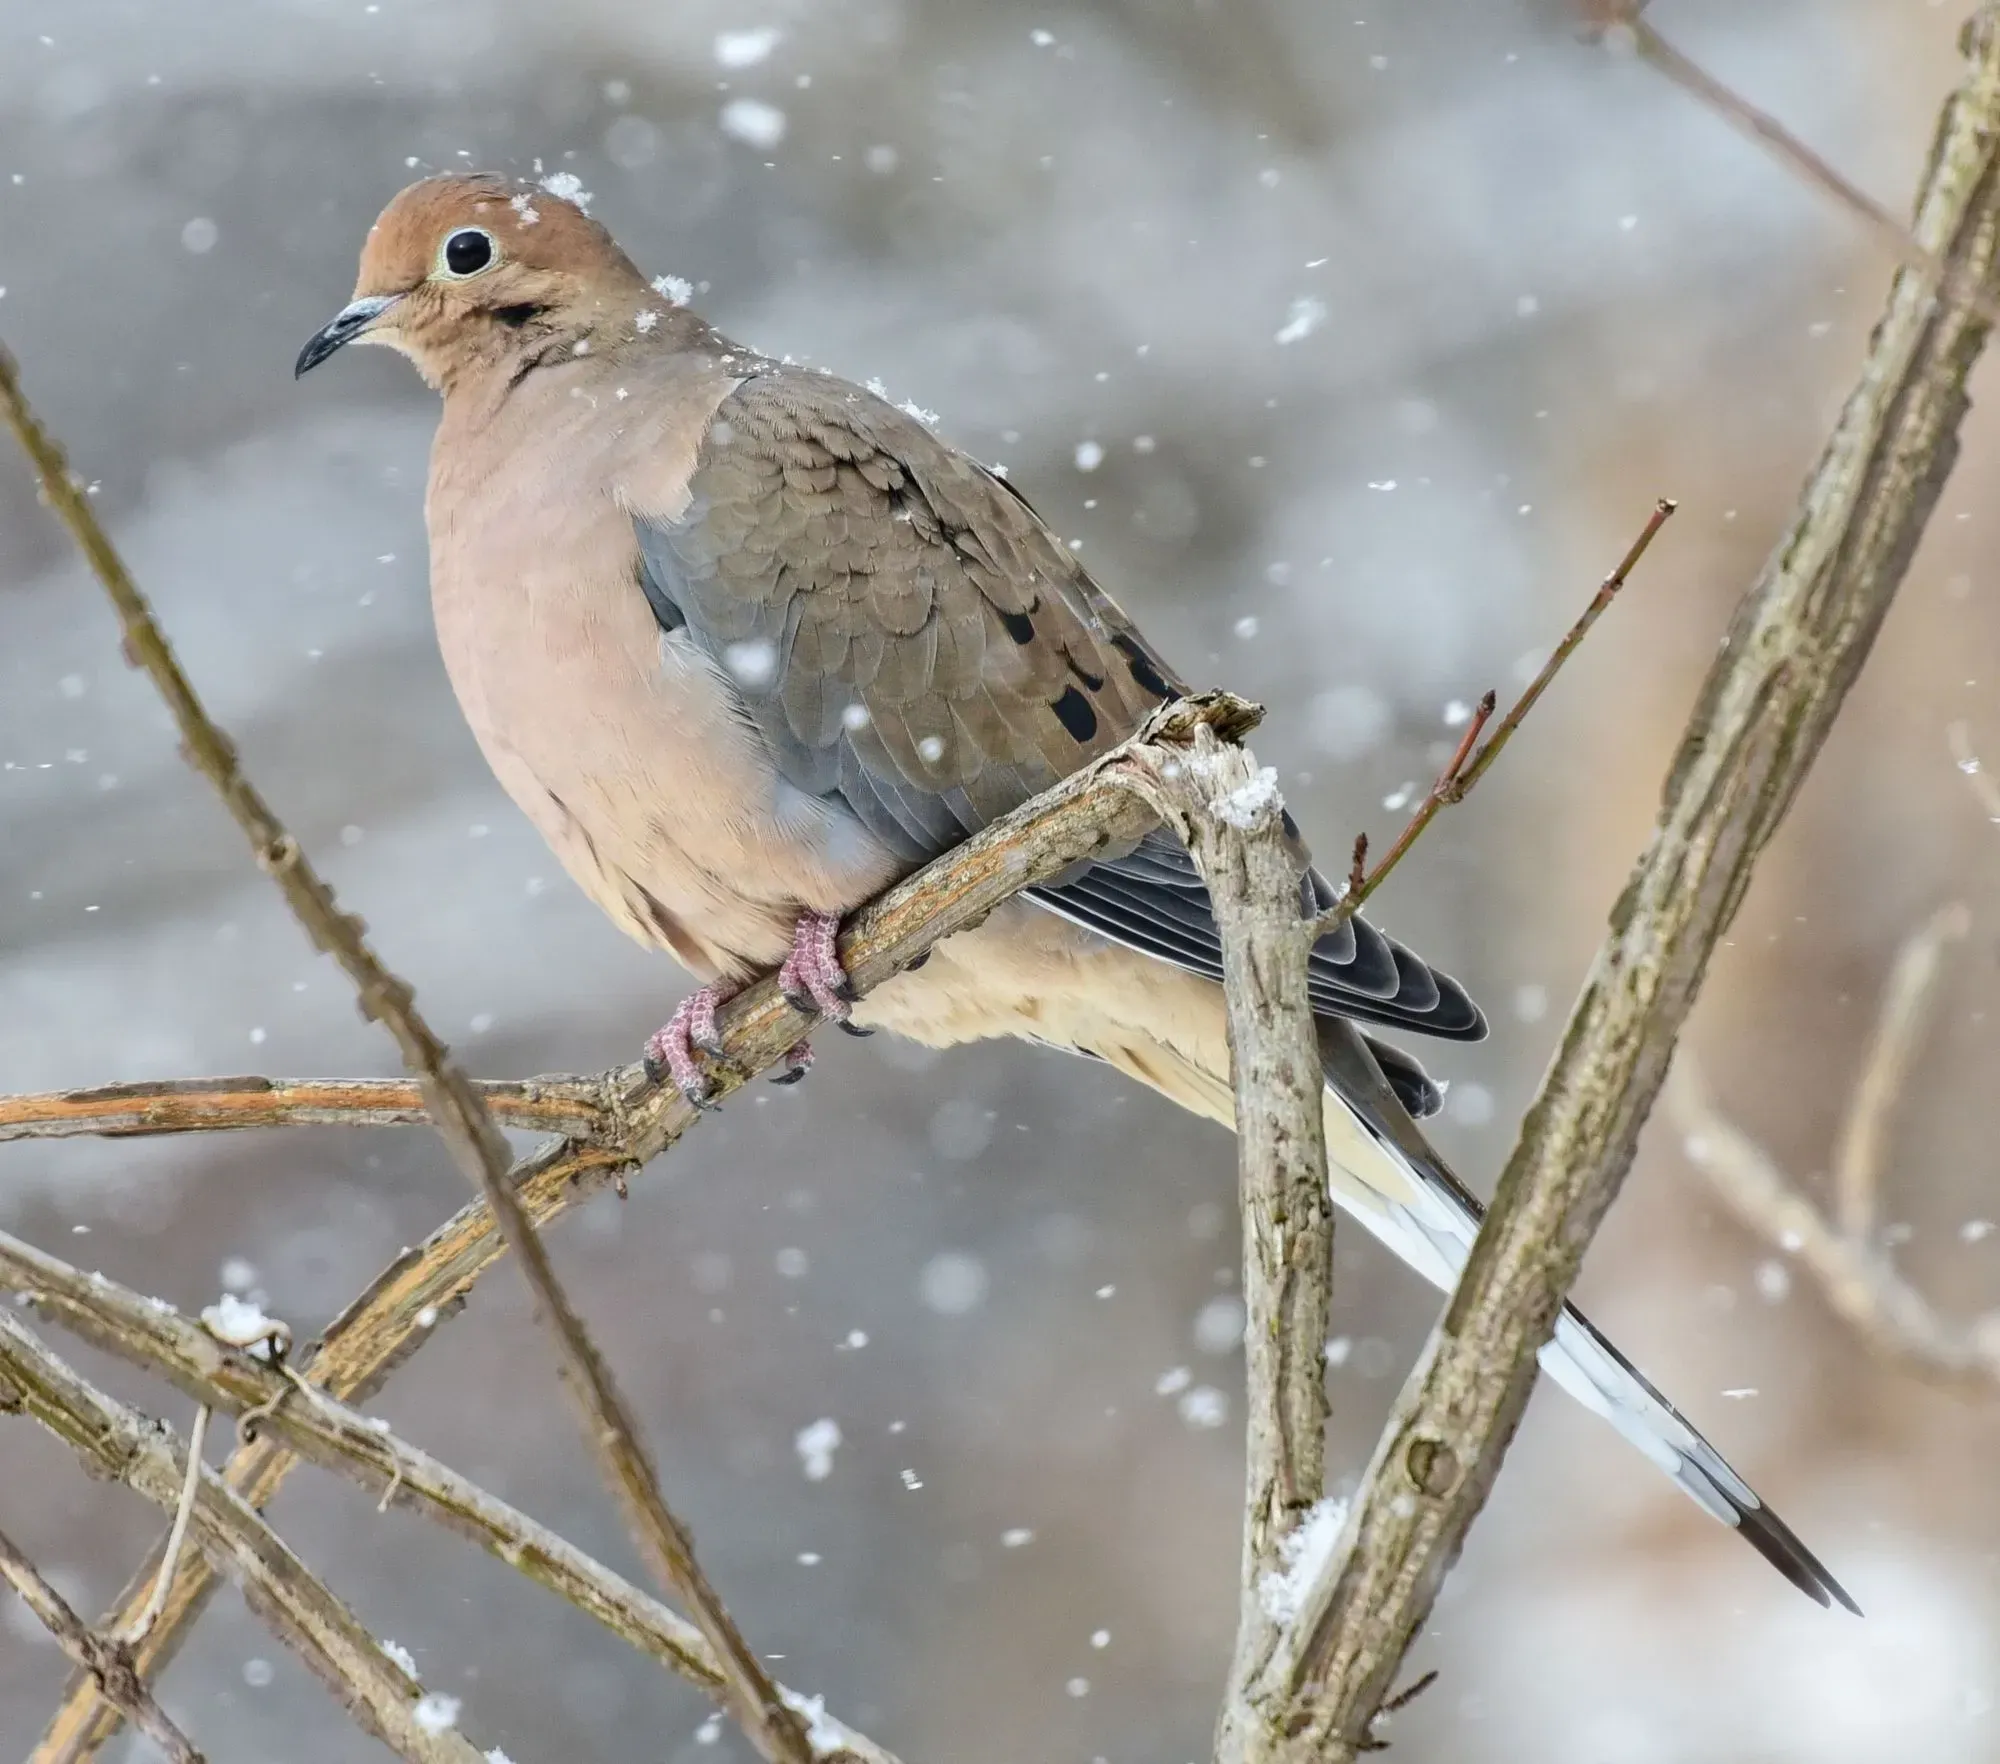 Both the colored and the spotted wood doves are known to have feathers that can be used to clean other feathers.